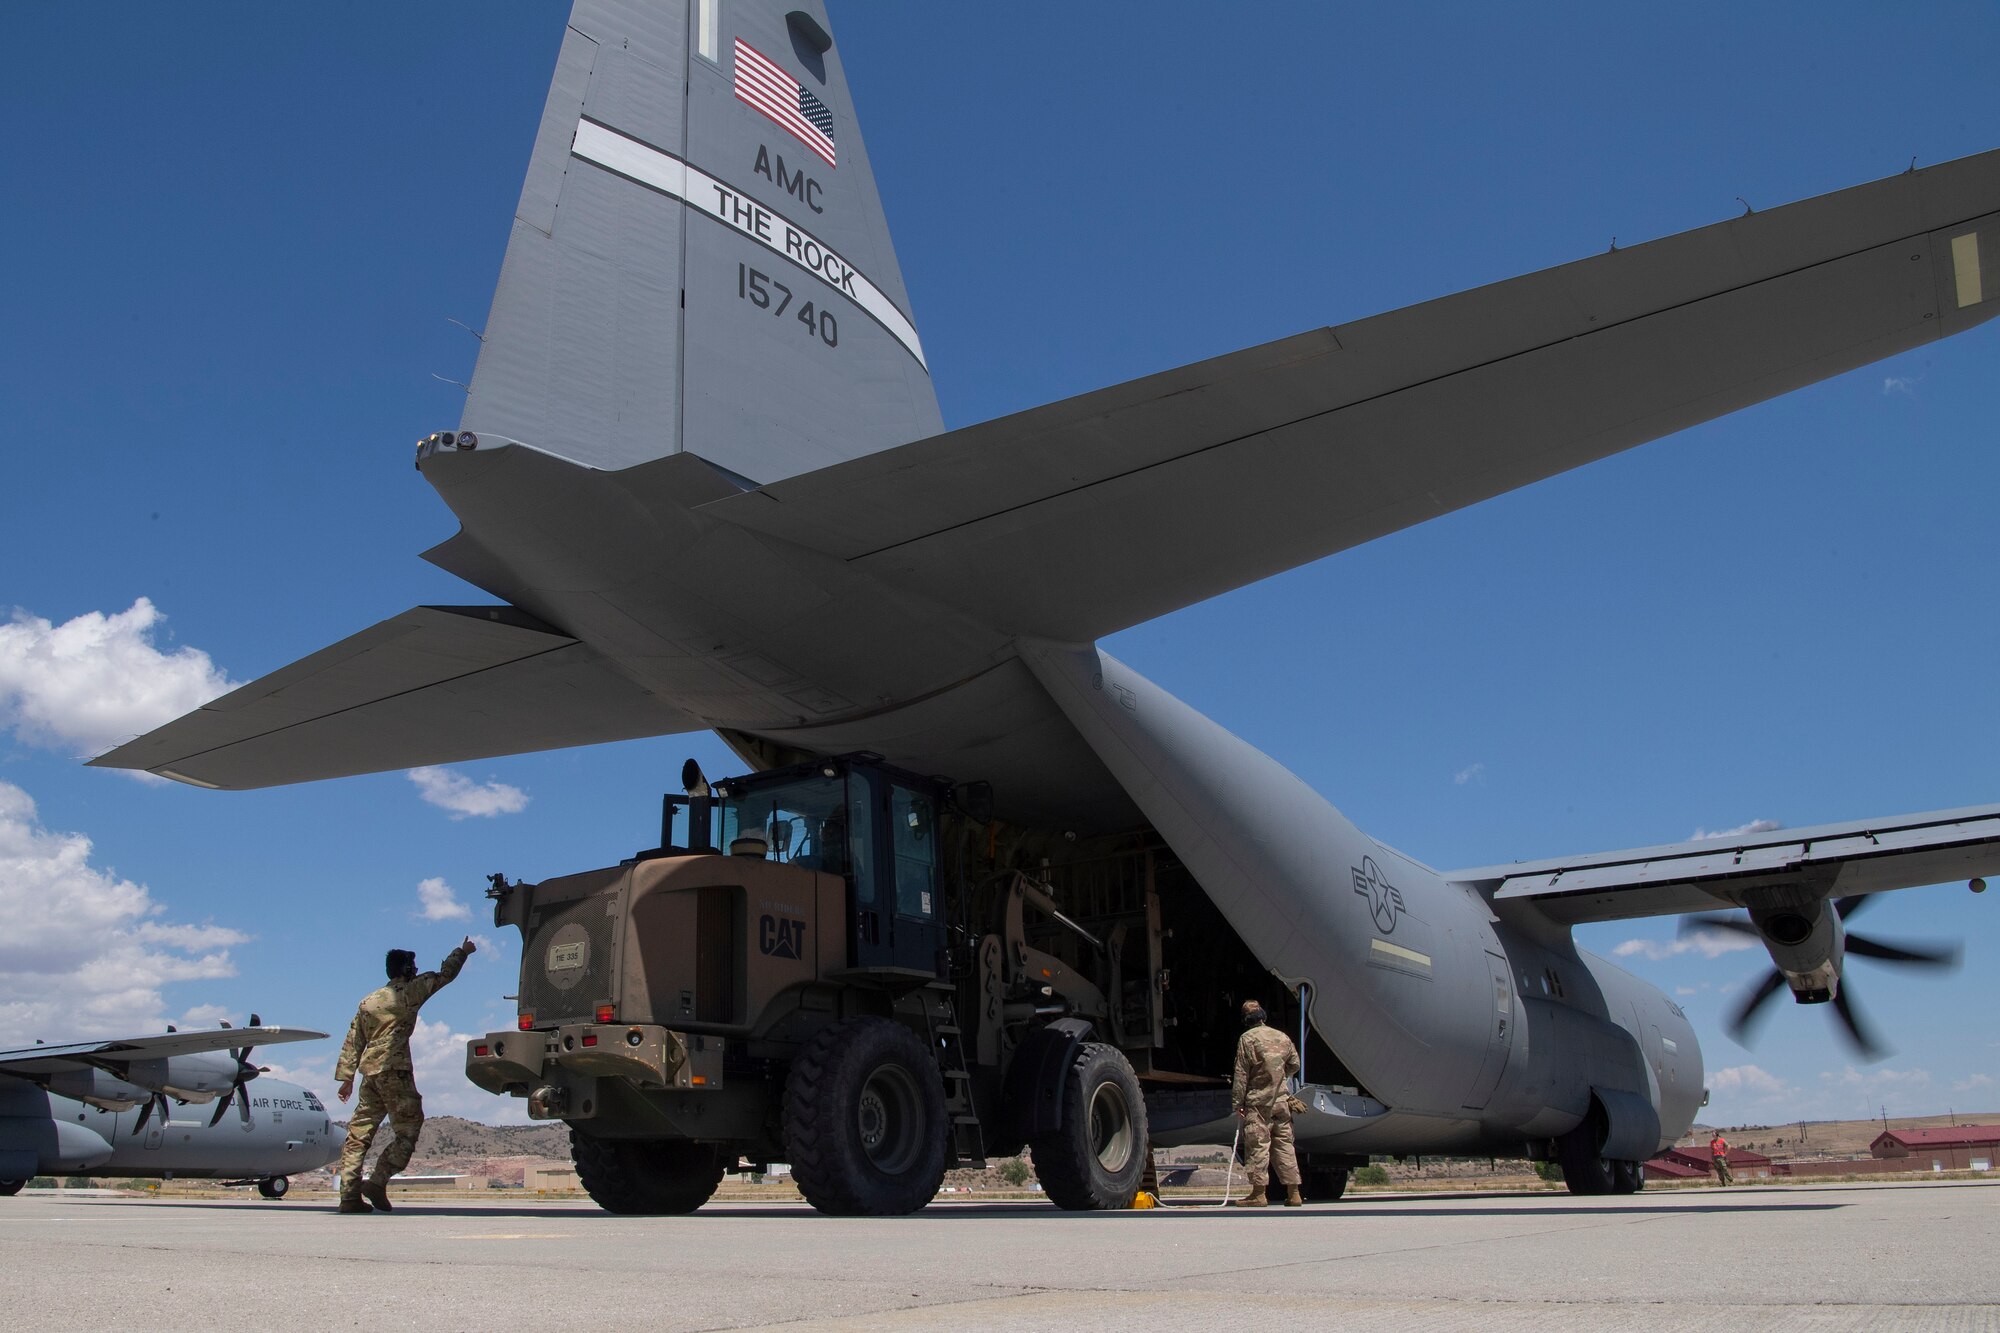 Airmen assigned to the 821st Contingency Response Squadron load cargo onto a C-130J Super Hercules during pre-deployment training at Guernsey Airport, Wyoming, July 27, 2020. This training is part of the 4/12 deployment initiative, which was developed in 2019 between airlift squadrons from Dyess Air Force Base, Texas and Little Rock AFB, allowing each squadron a full year of dwell time followed by a four-month rotation to their respective area of responsibility. (U.S. Air Force photo by Airman 1st Class Aaron Irvin)